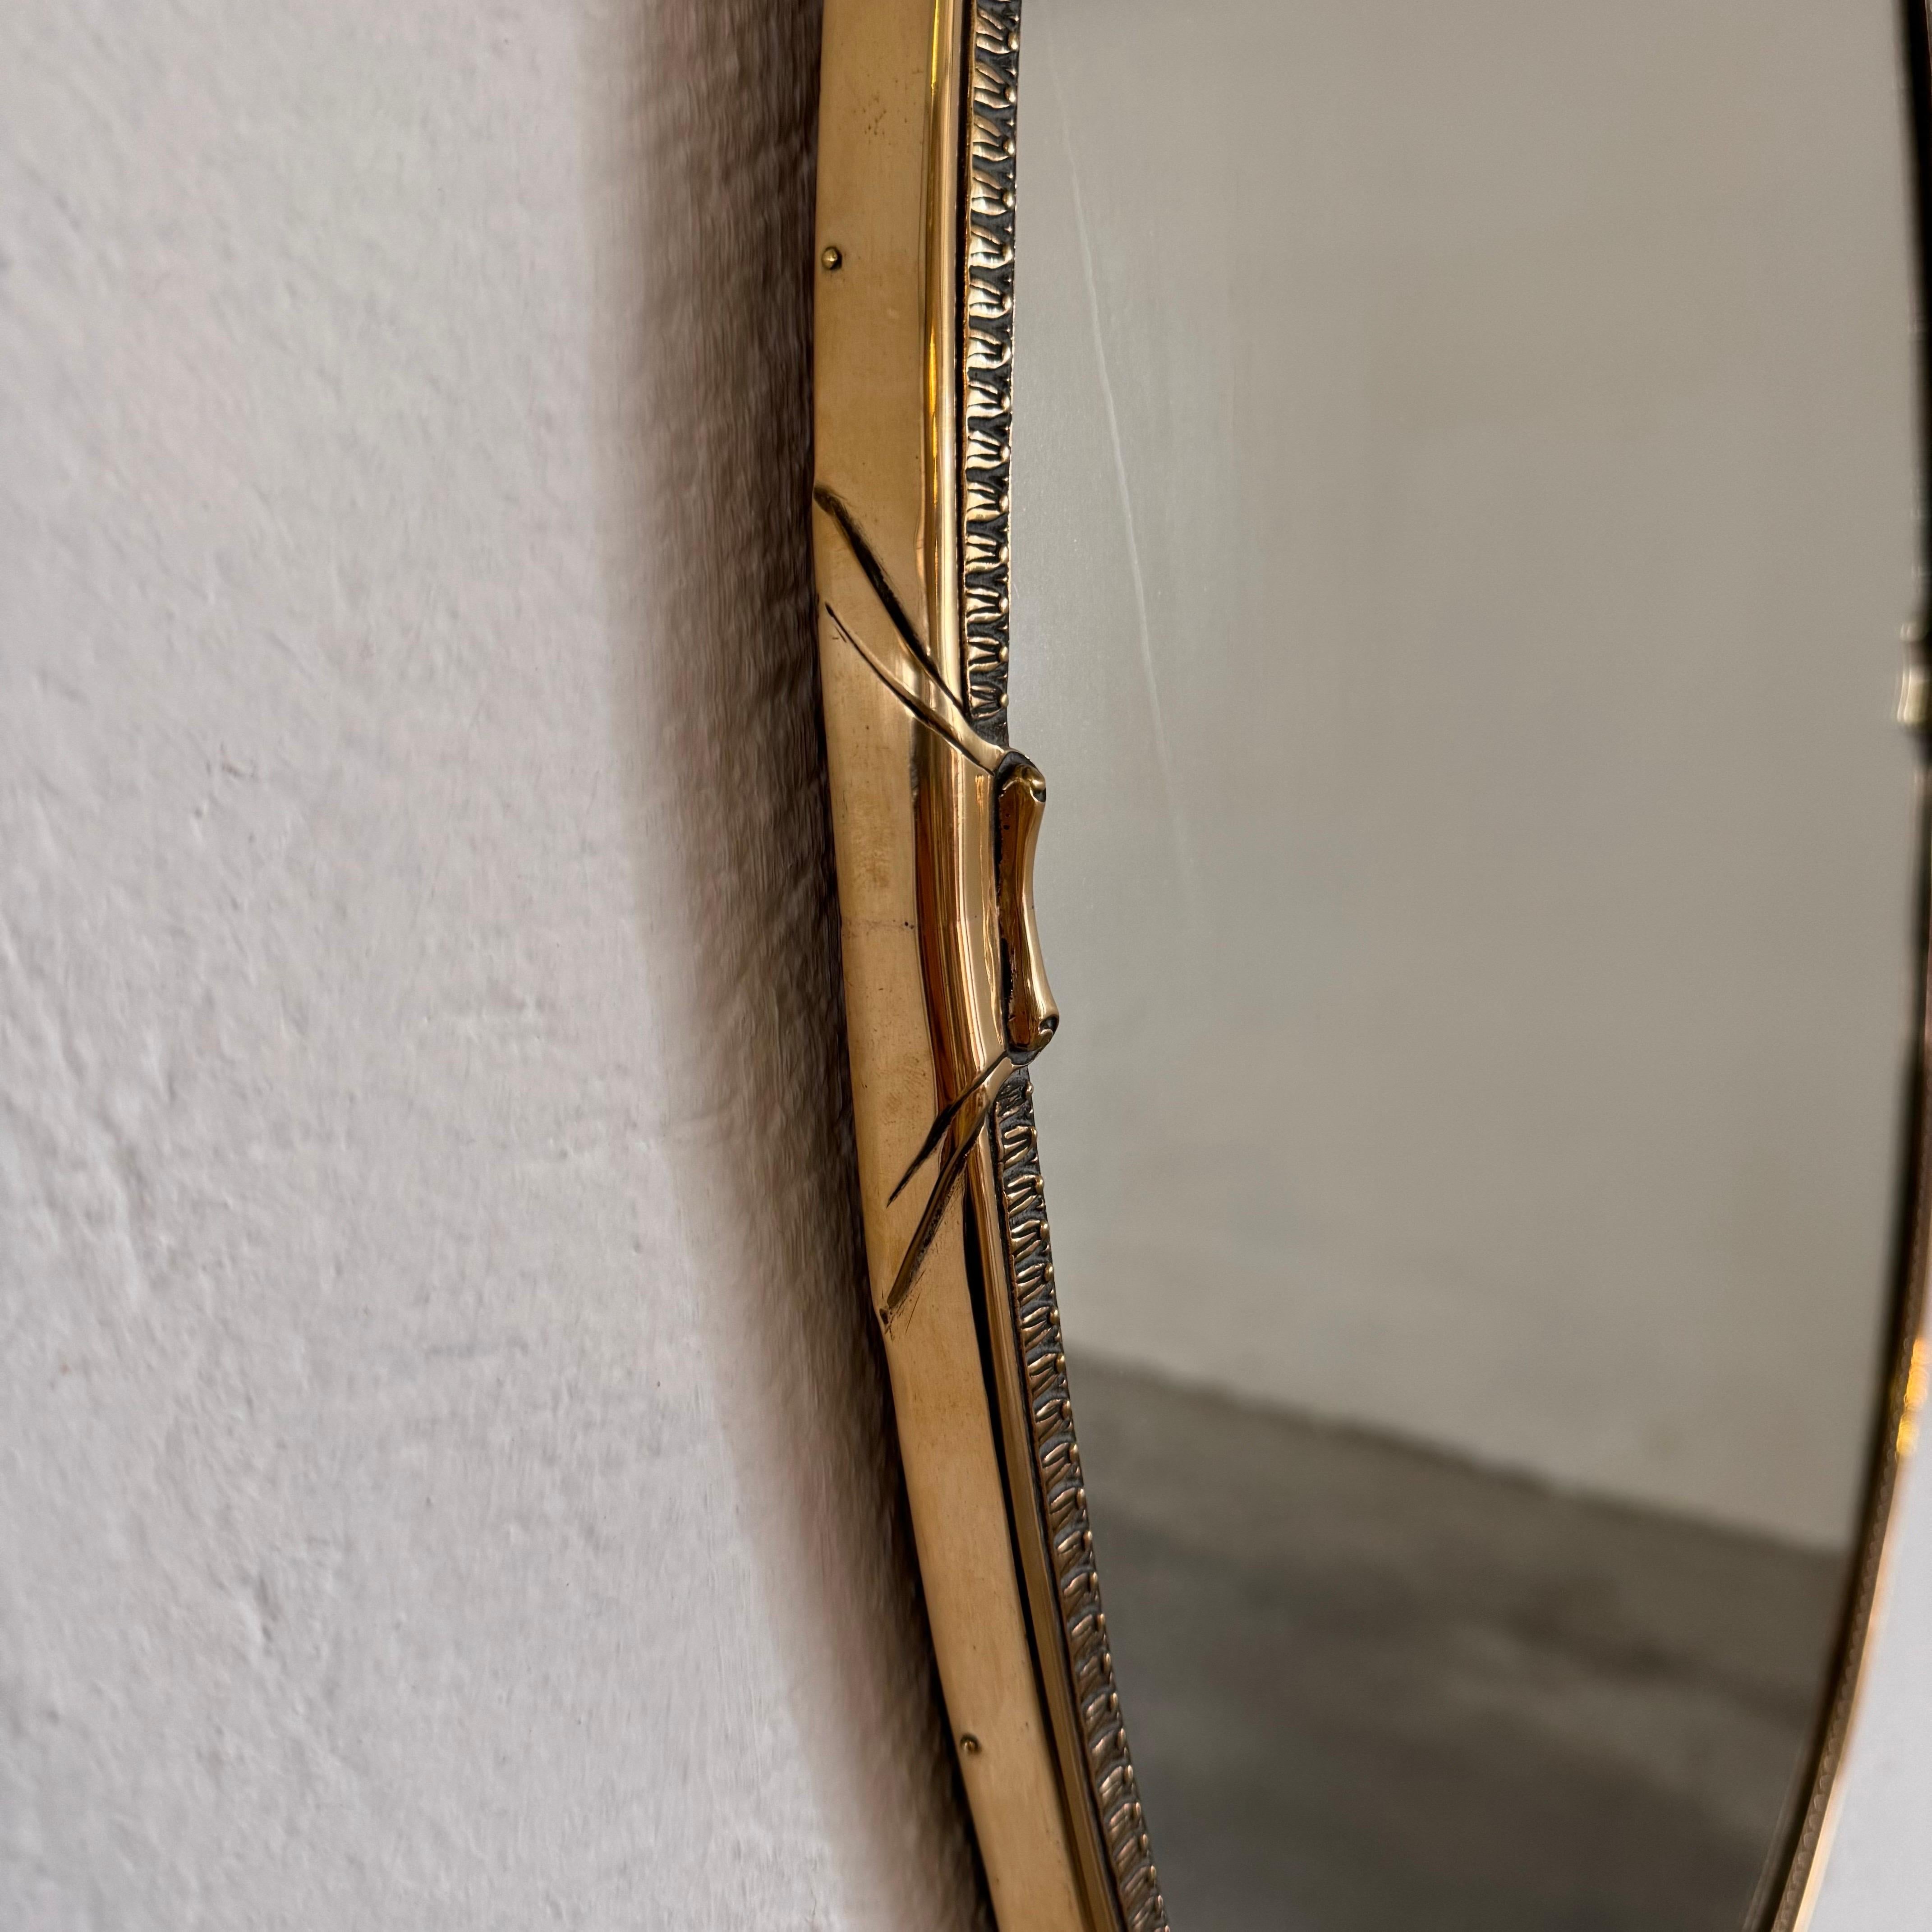 Exquisite 1950s Italian Brass Mirror in the Style of Gio Ponti For Sale 7